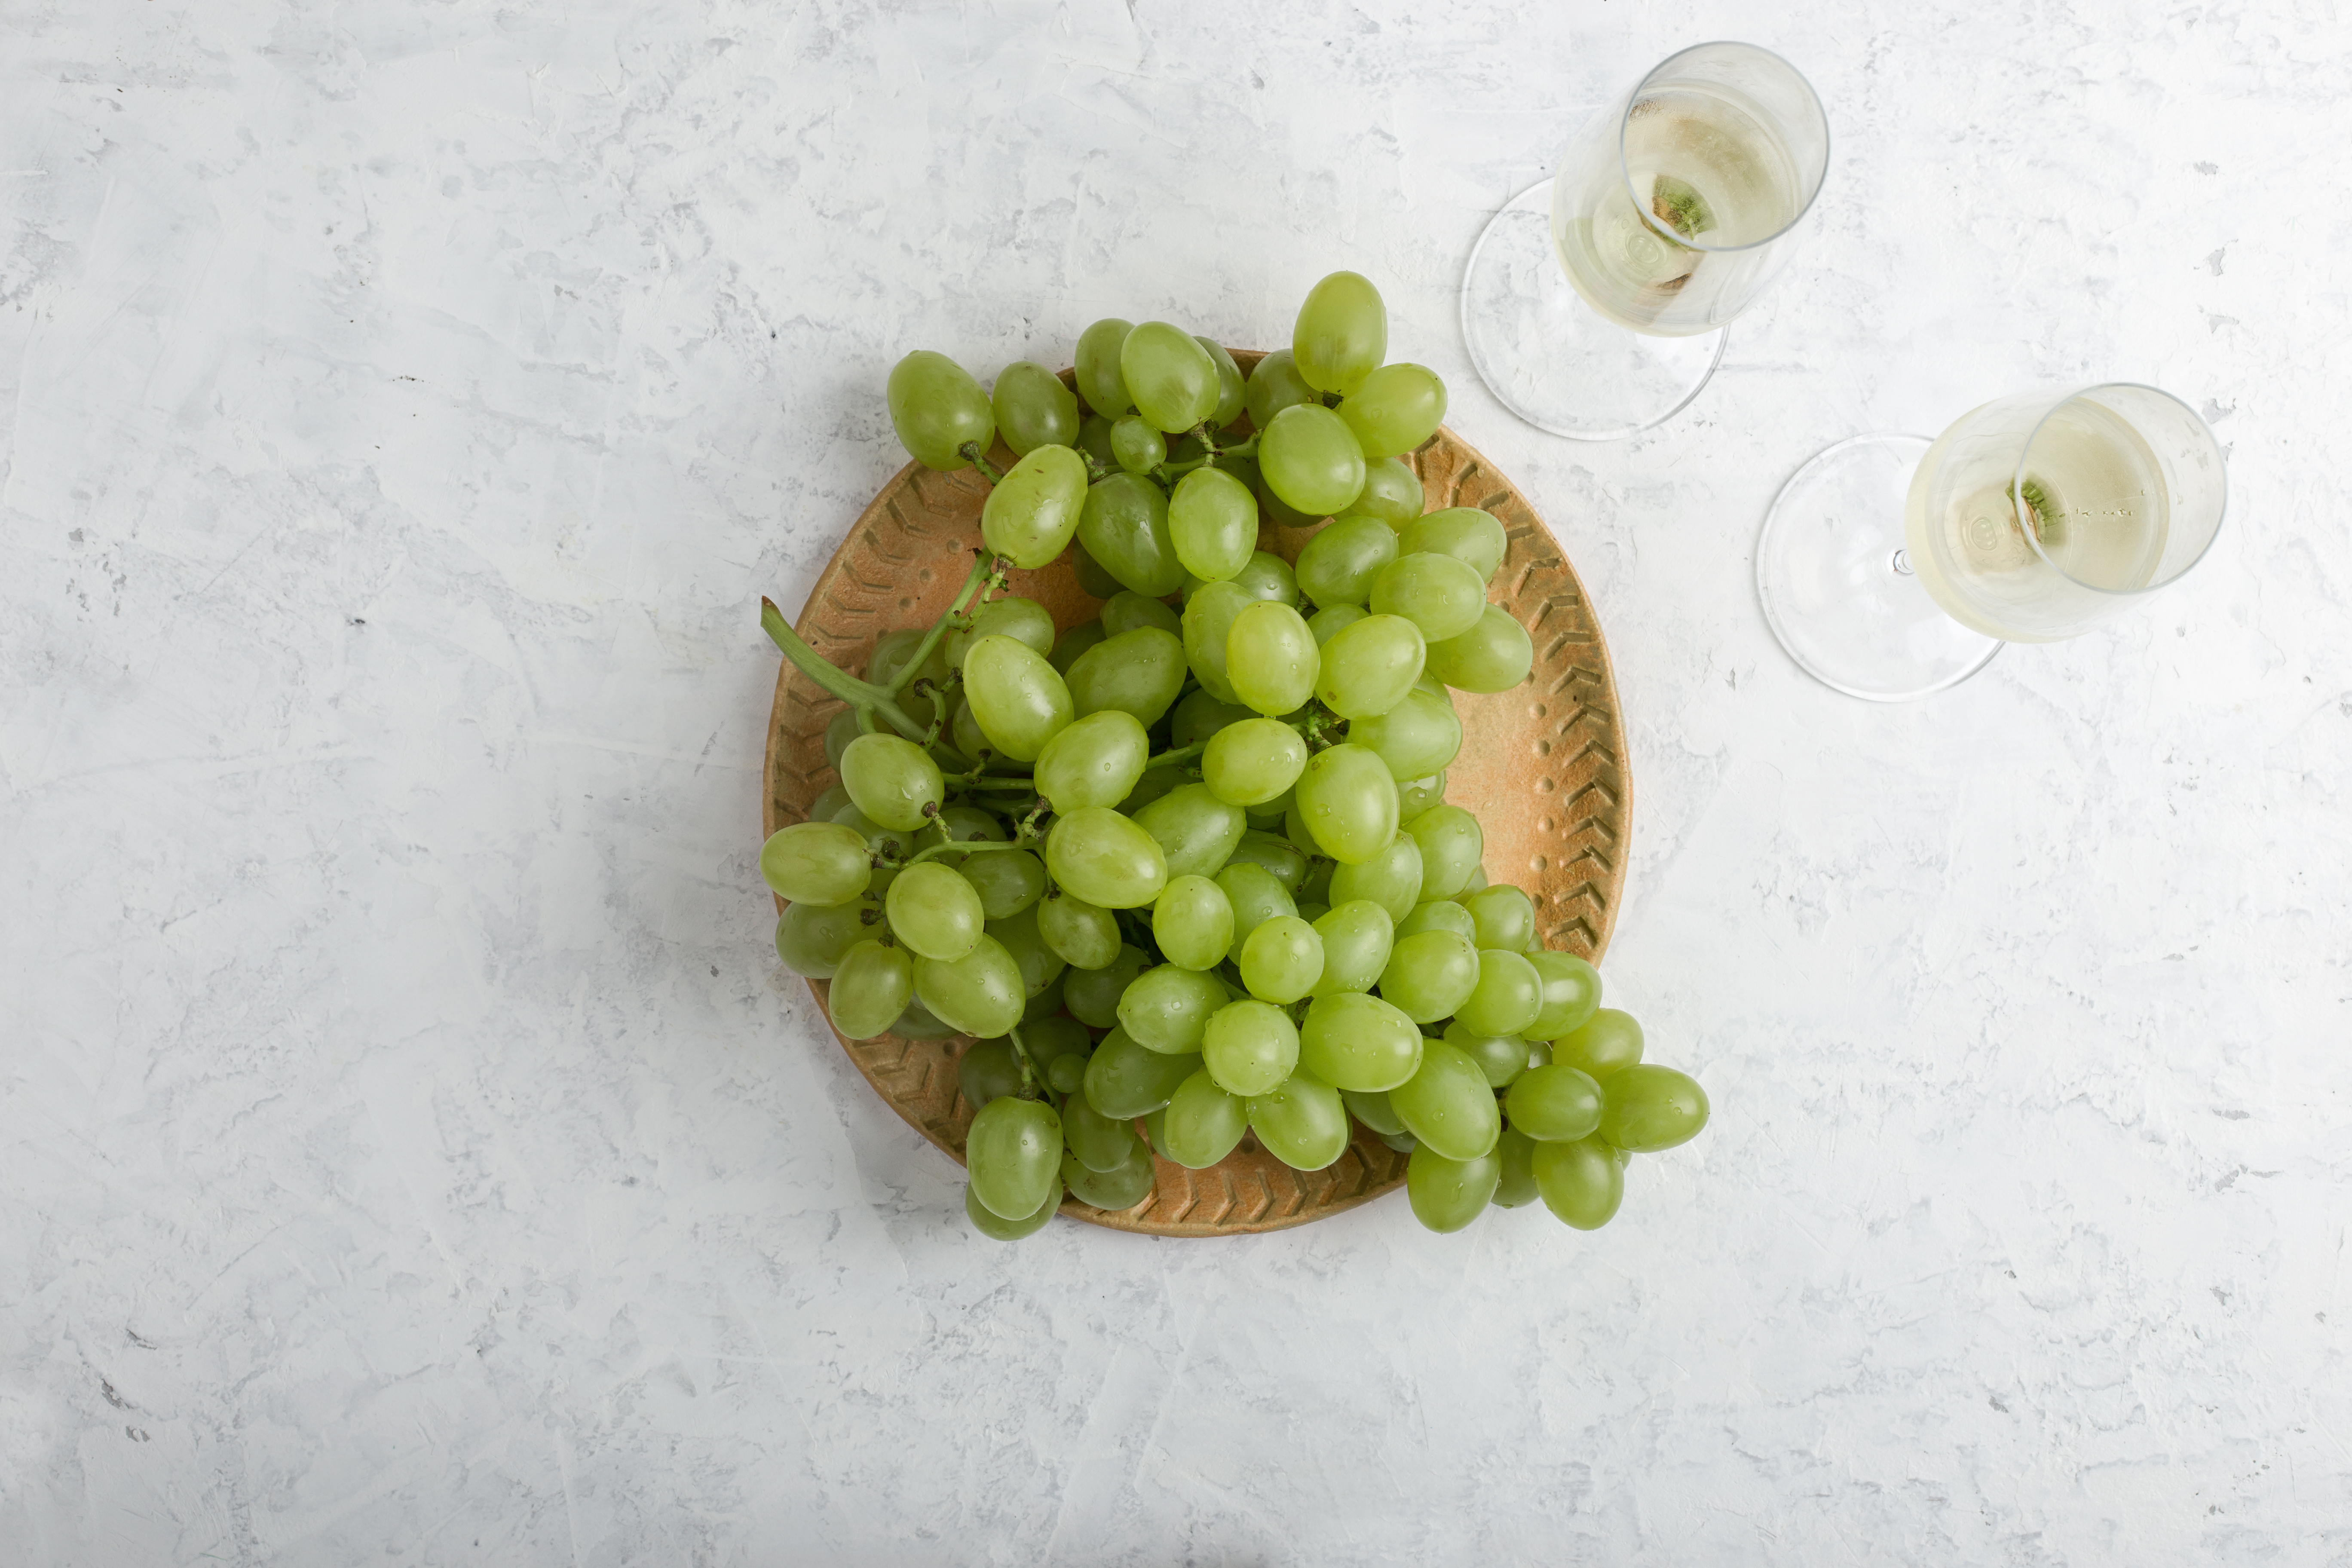 Green Seedless Grapes Information and Facts